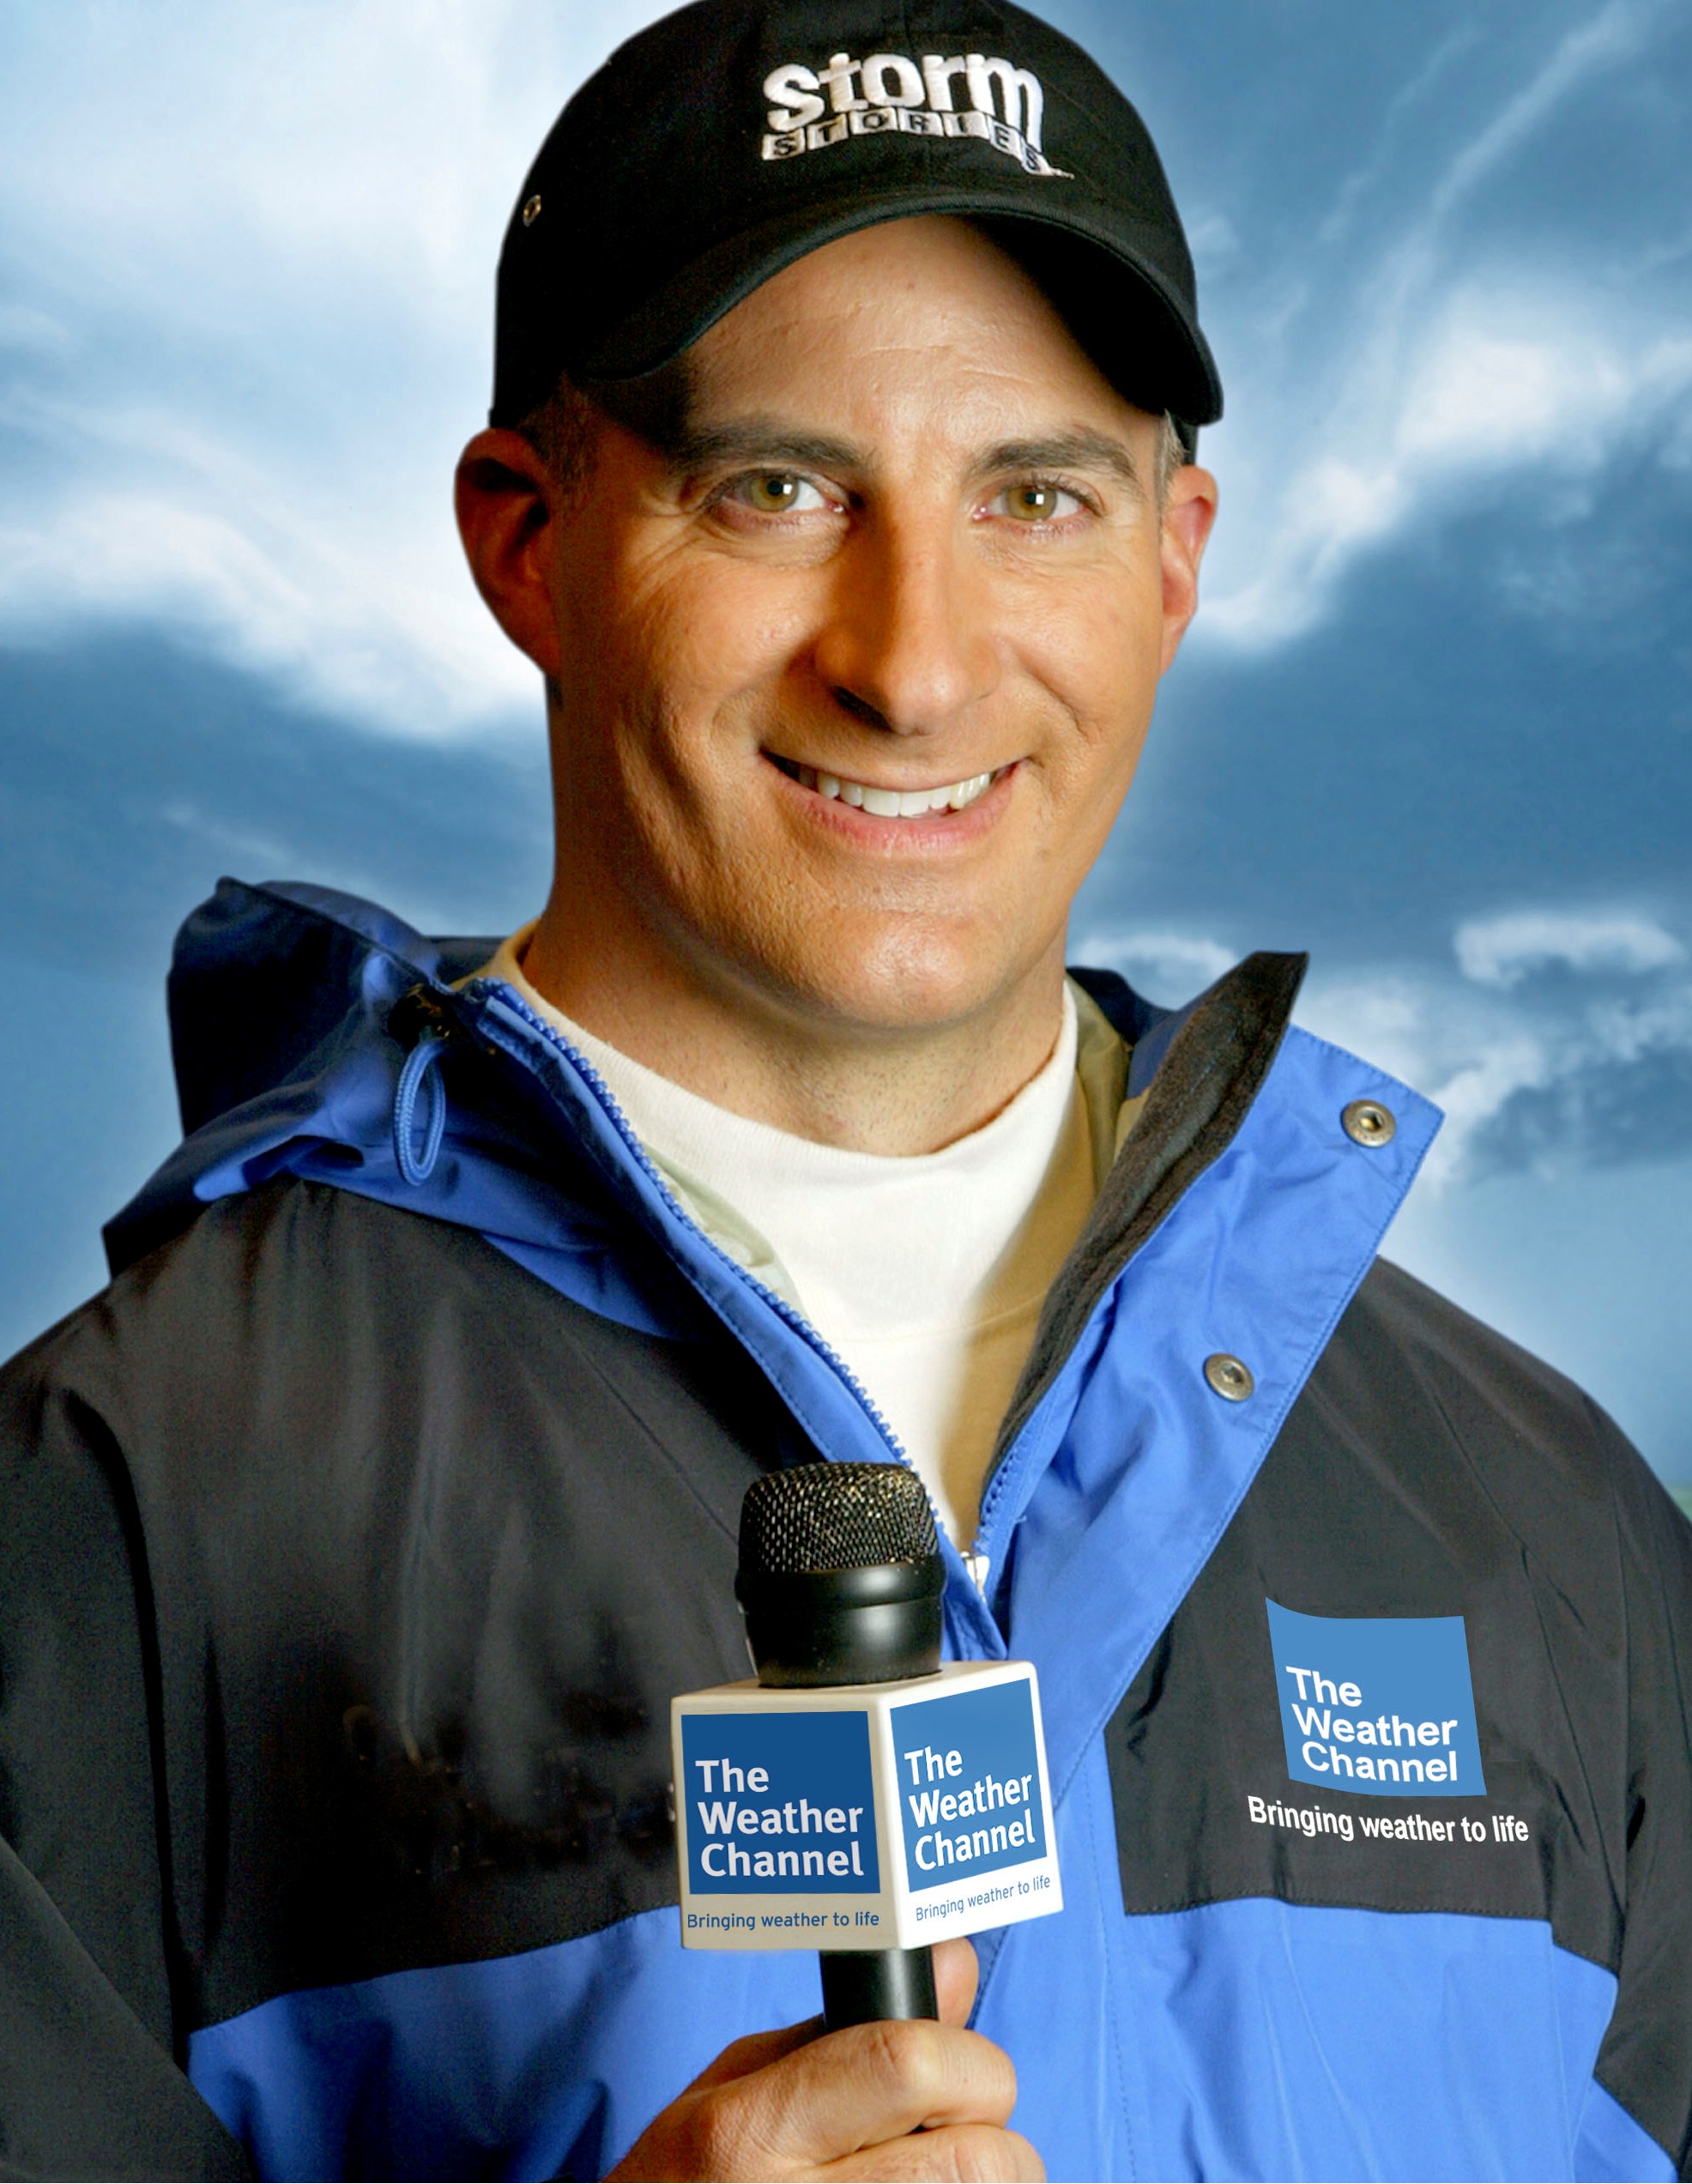 Jim Cantore joins Sam Champion on The Weather Channel morning show AMHQ